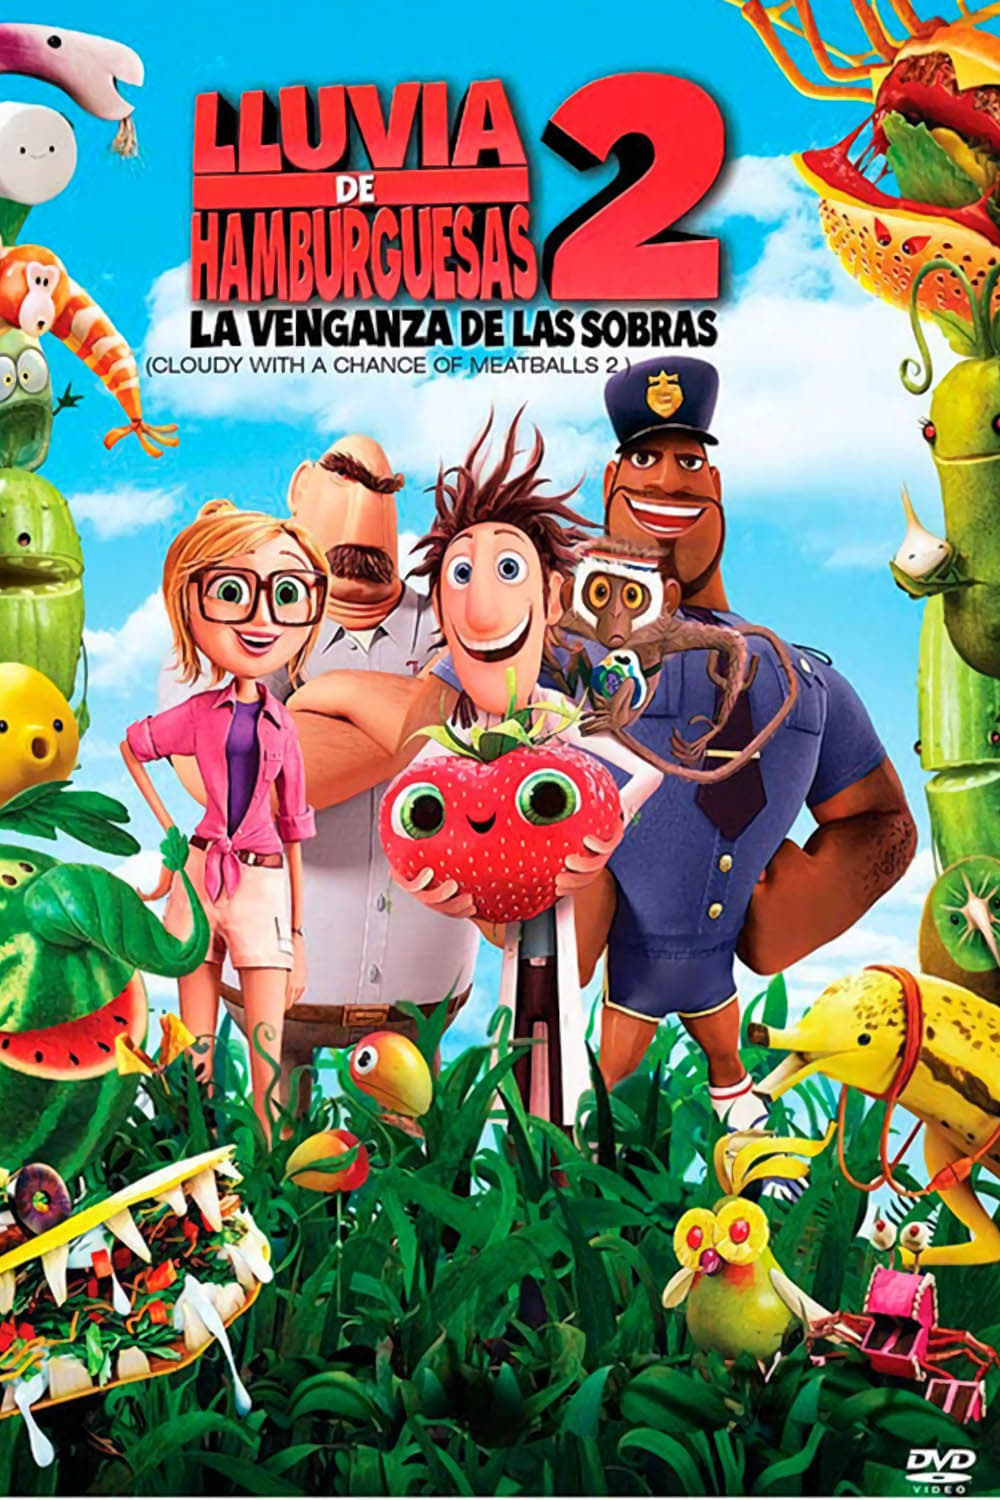 Watch Cloudy with a Chance of Meatballs 2 (2013) Full Movie Online Free - CineFOX - Cloudy With A Chance Of Meatballs 2 Full Movie Free